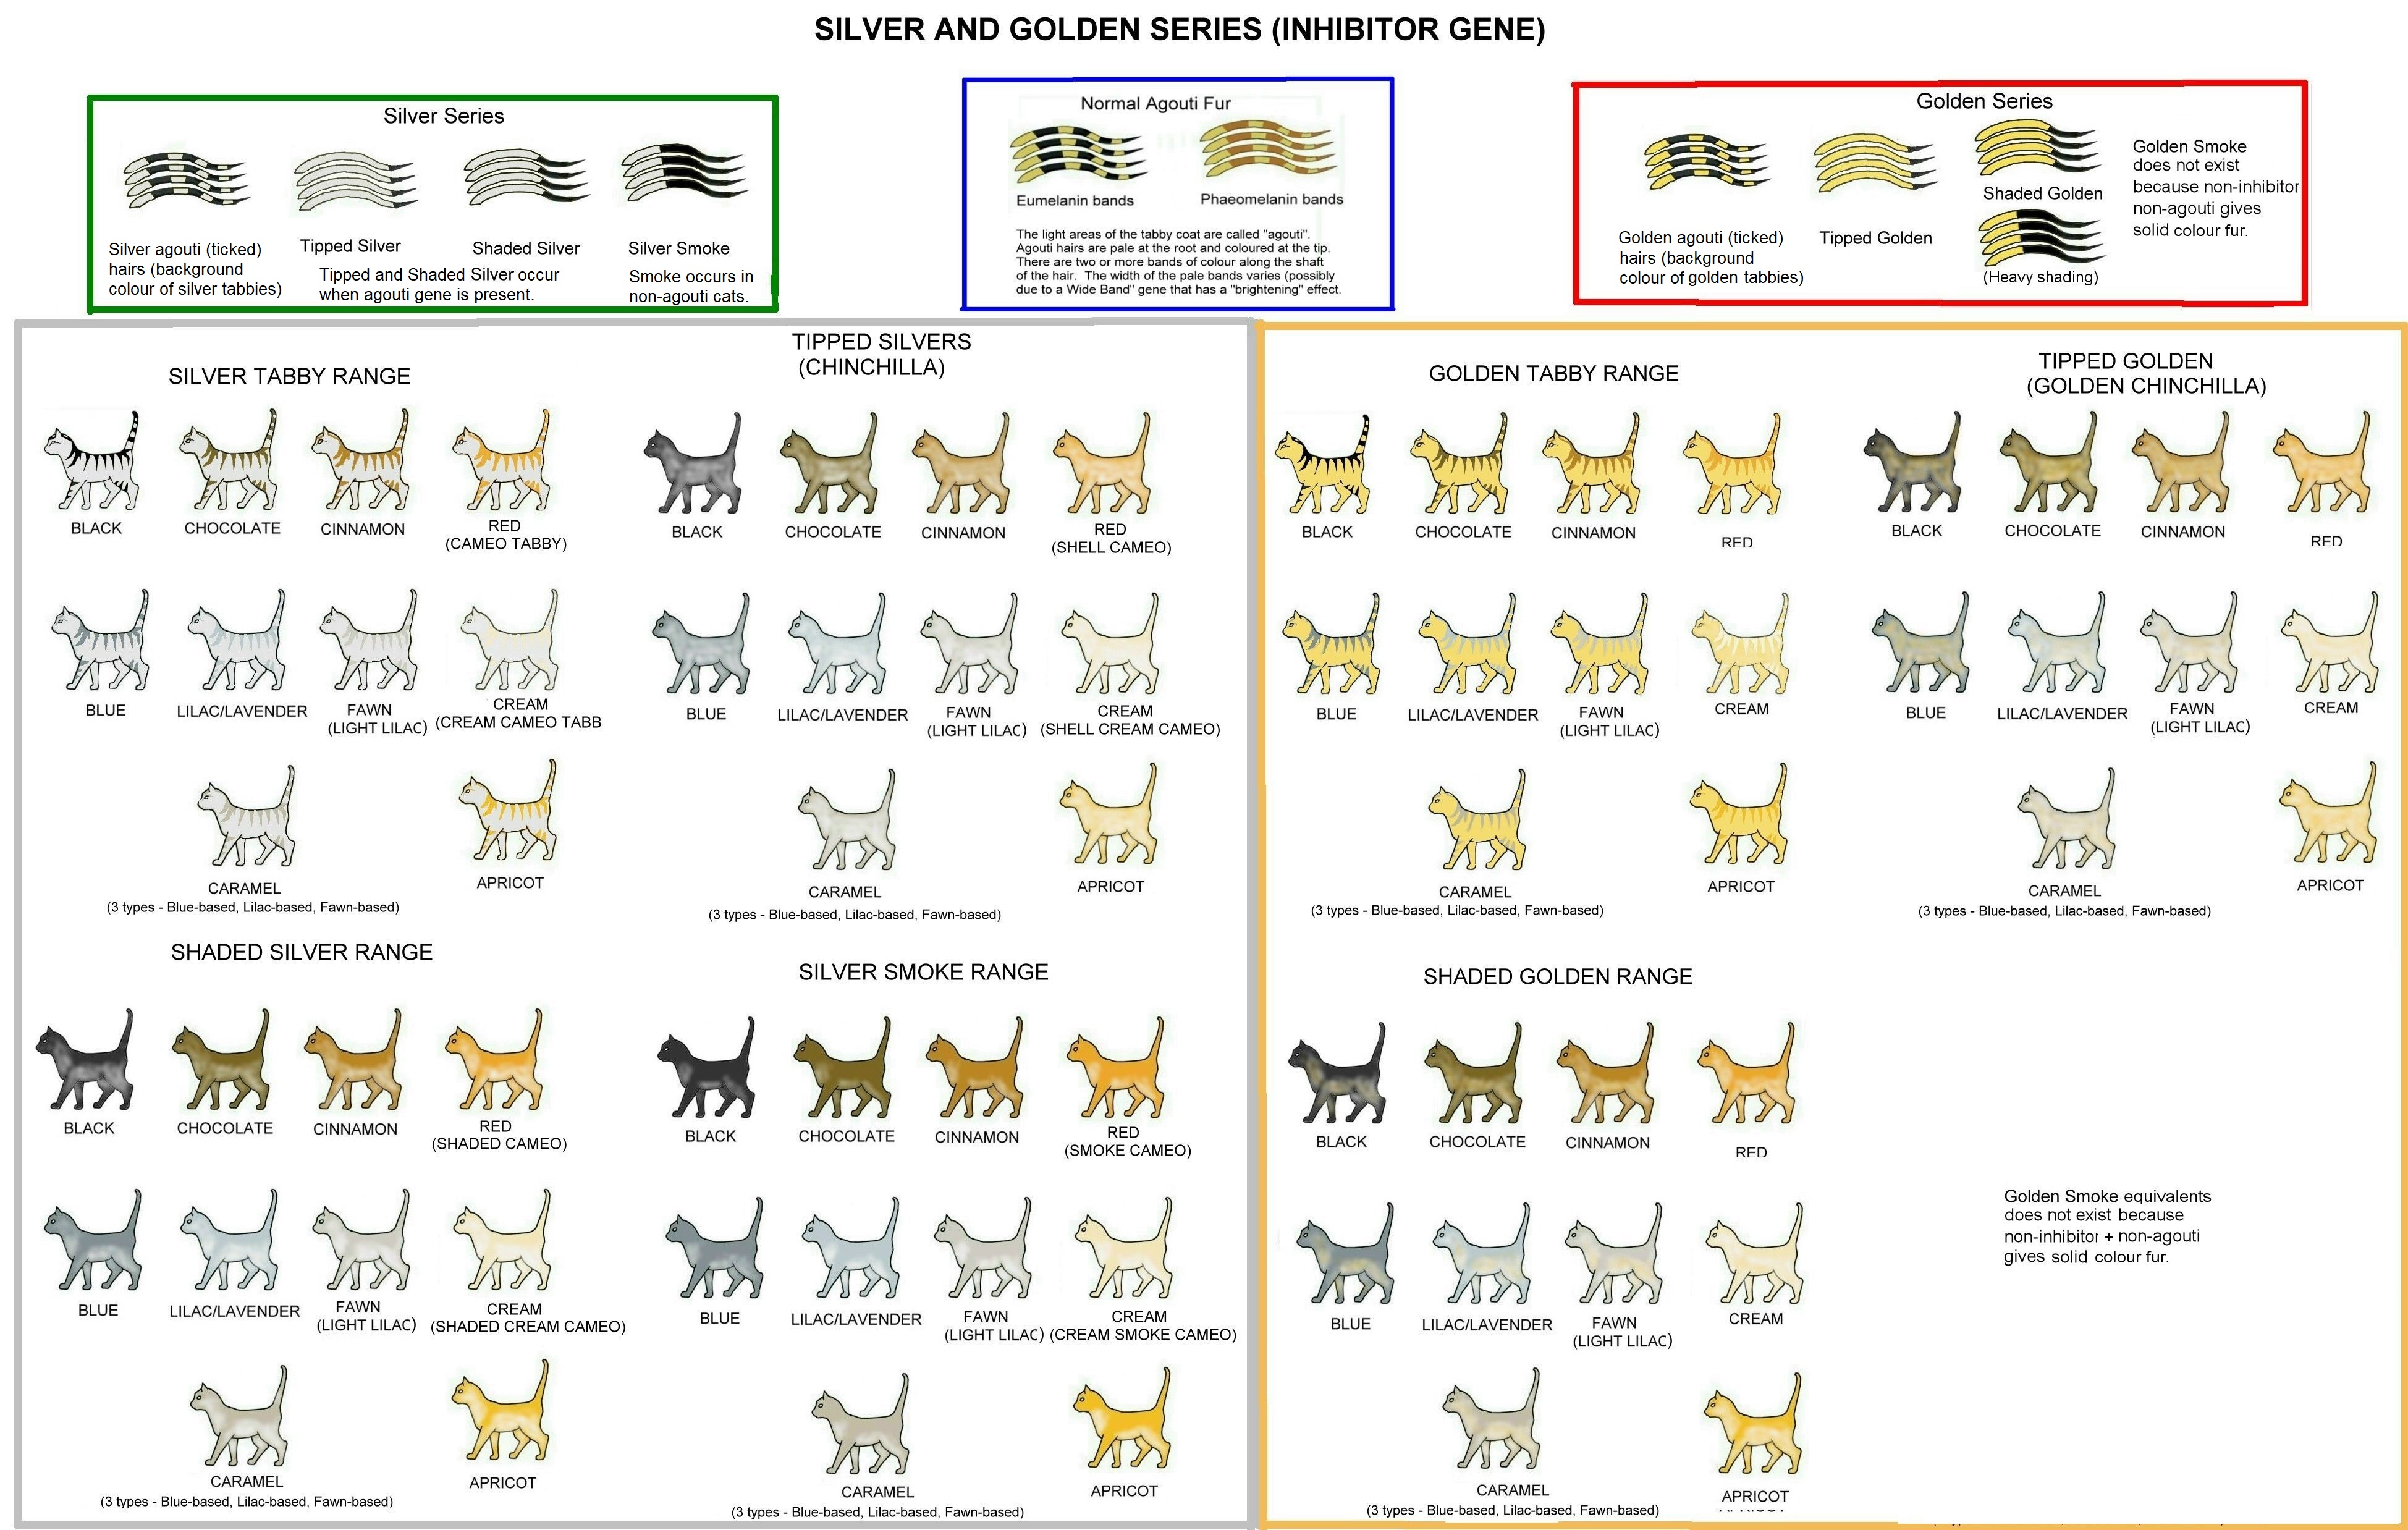 Cat Colors And Markings Chart